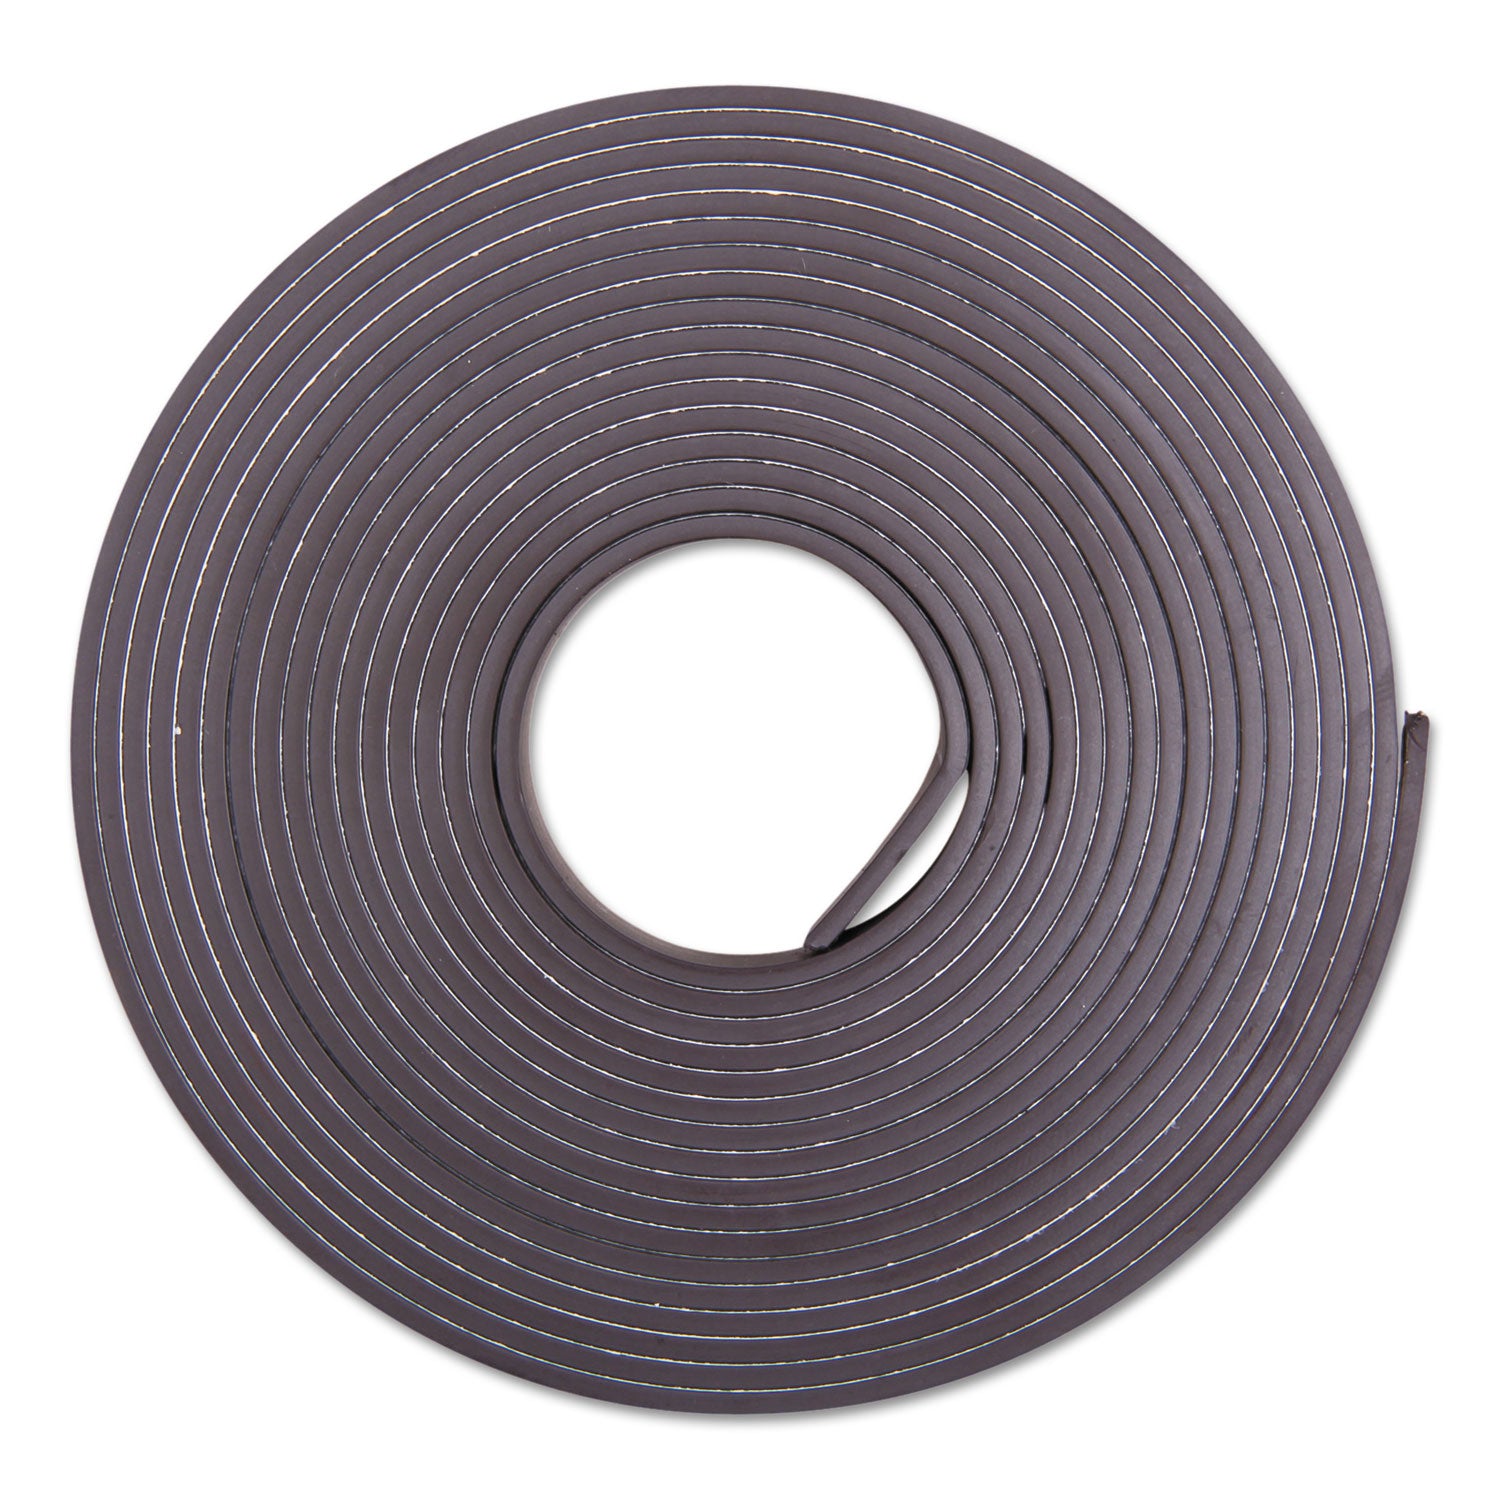 Adhesive-Backed Magnetic Tape, 0.5" x 10 ft, Black - 